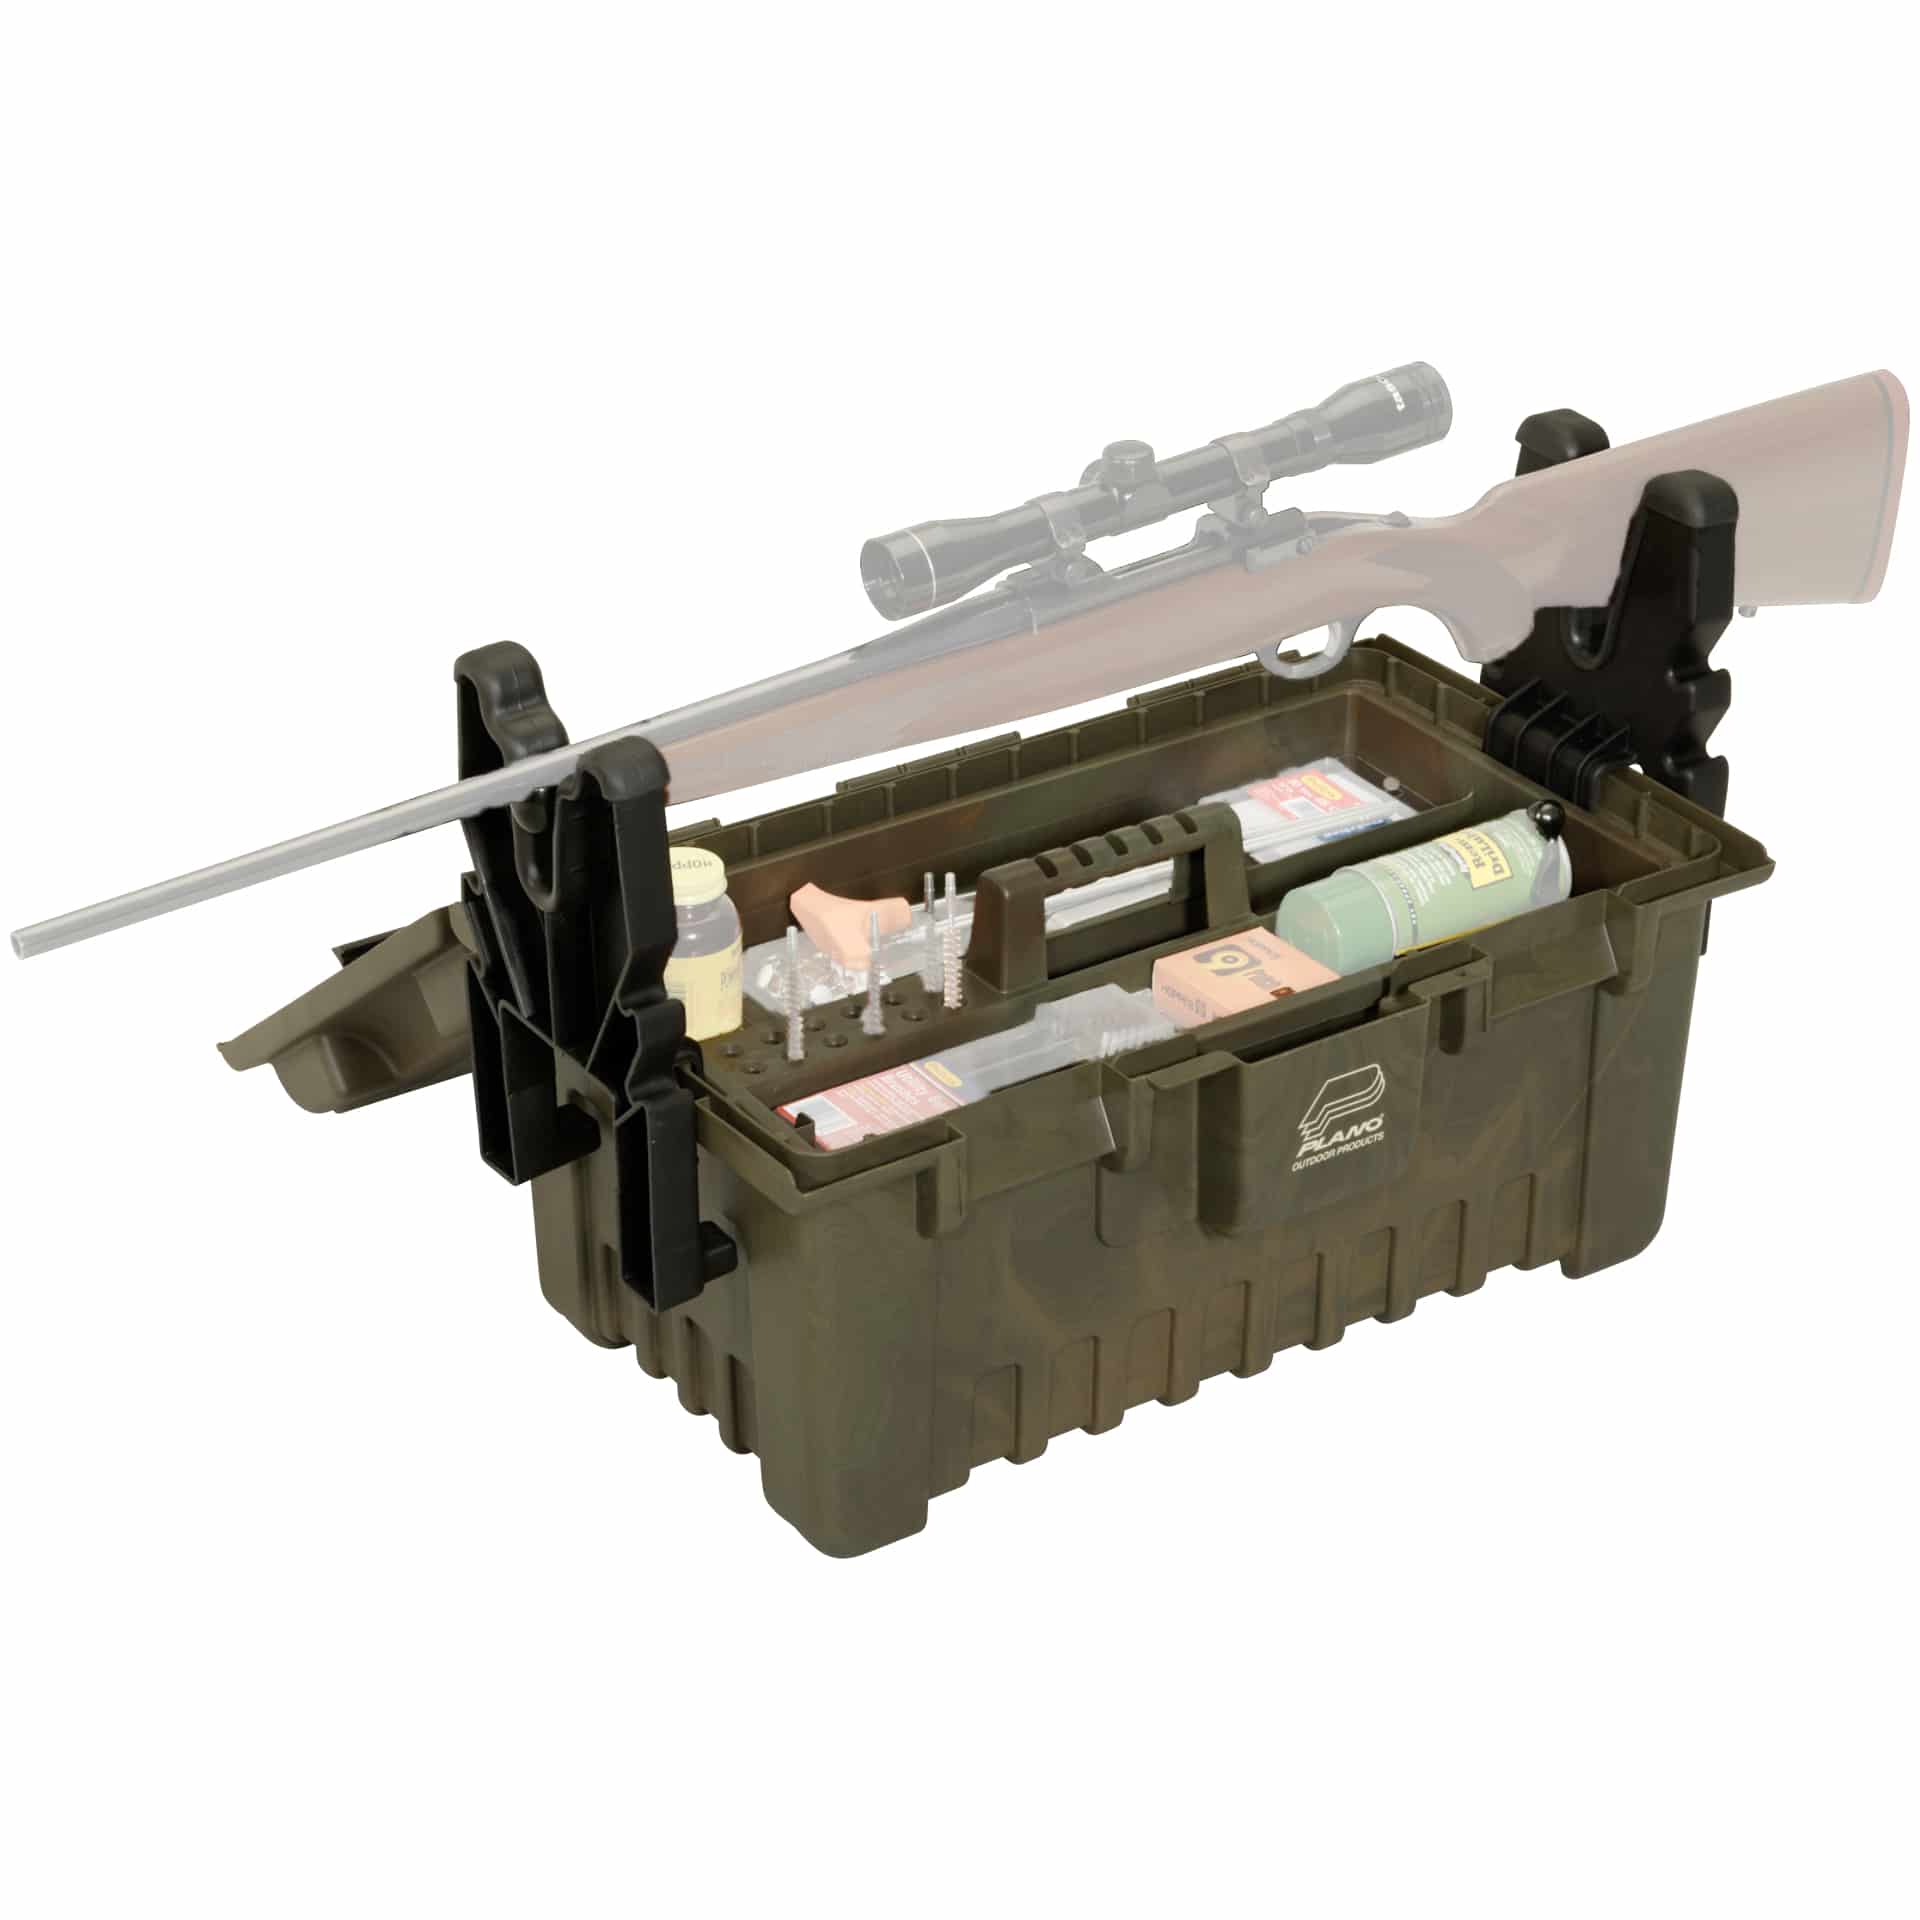 Maintenance box with weapon stand